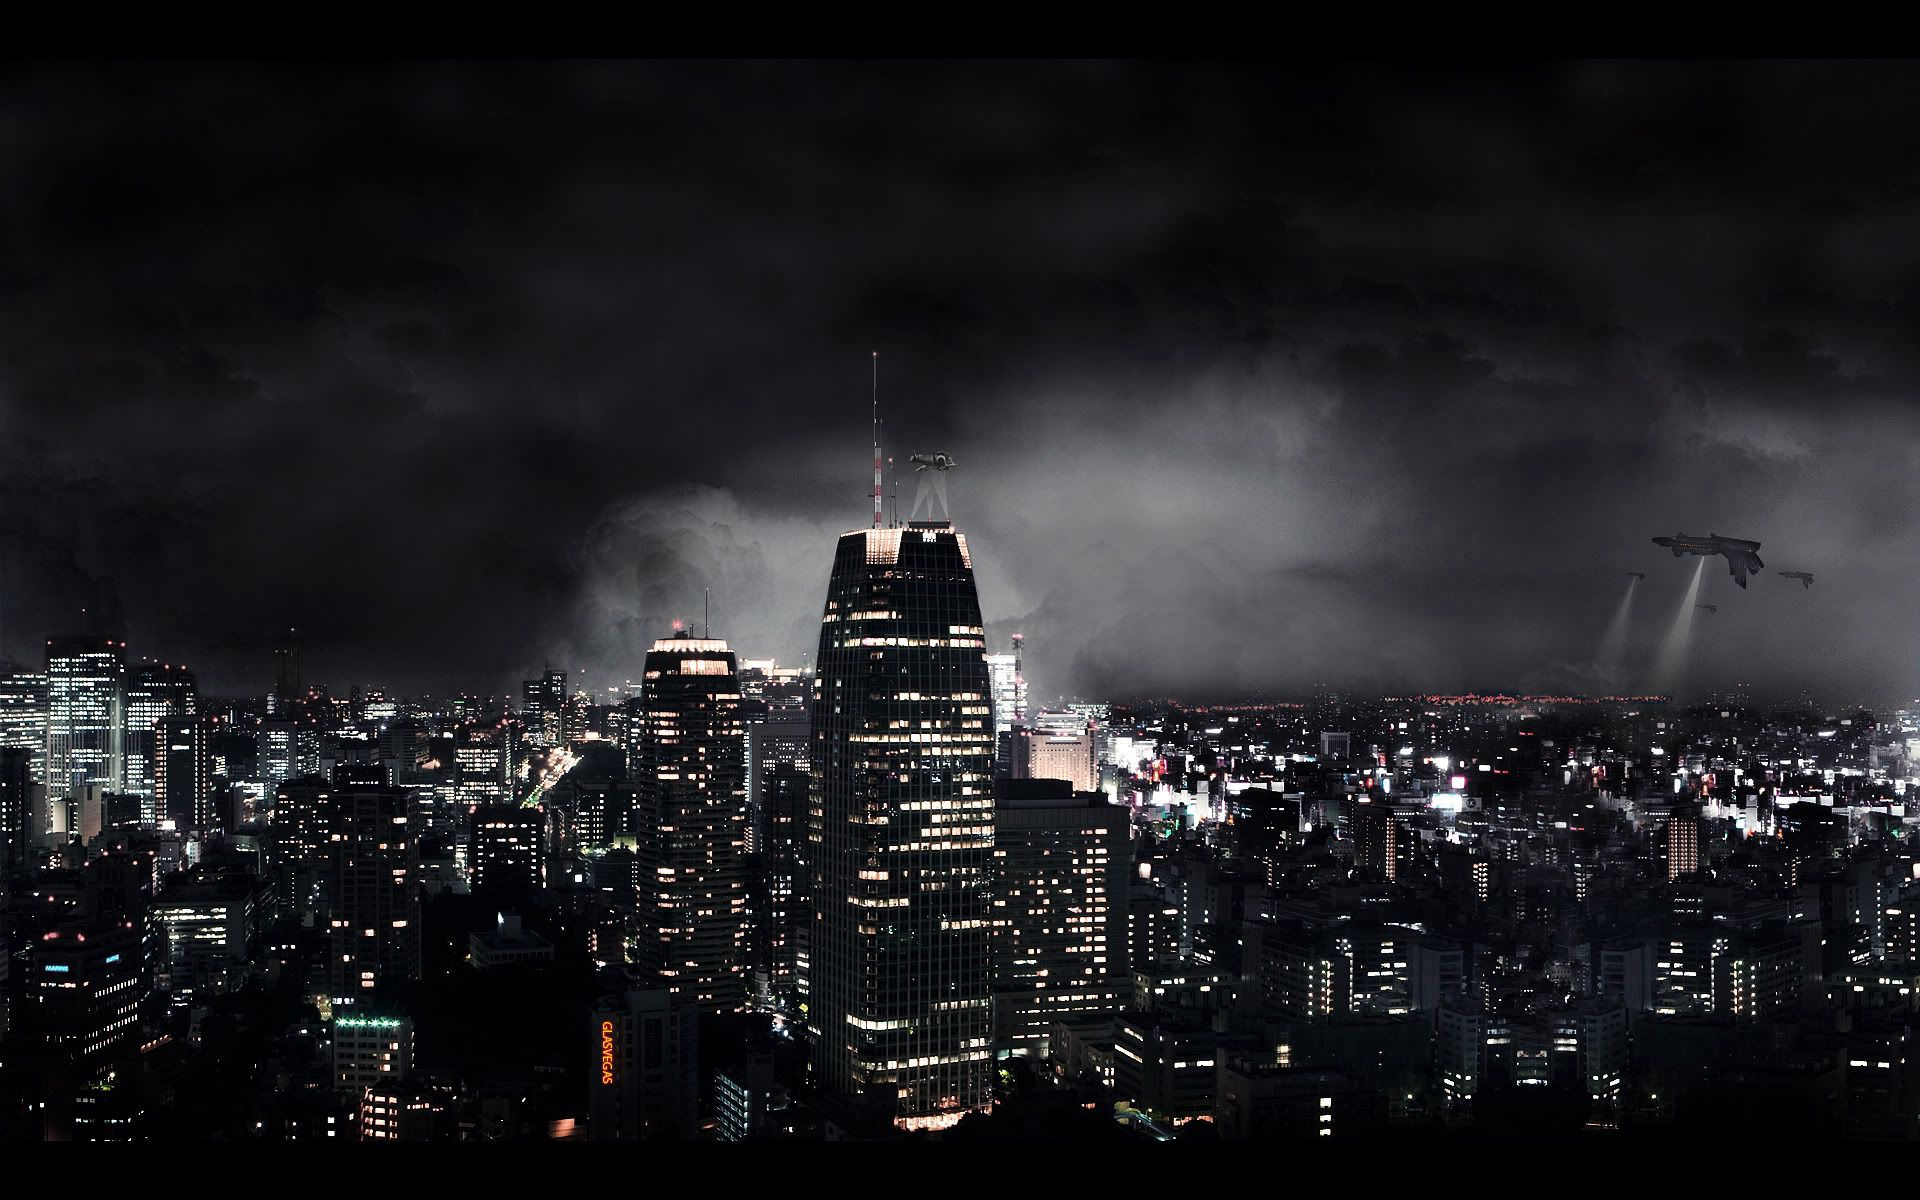 that's incredible, cities, night, skyscrapers, fiction, dark city